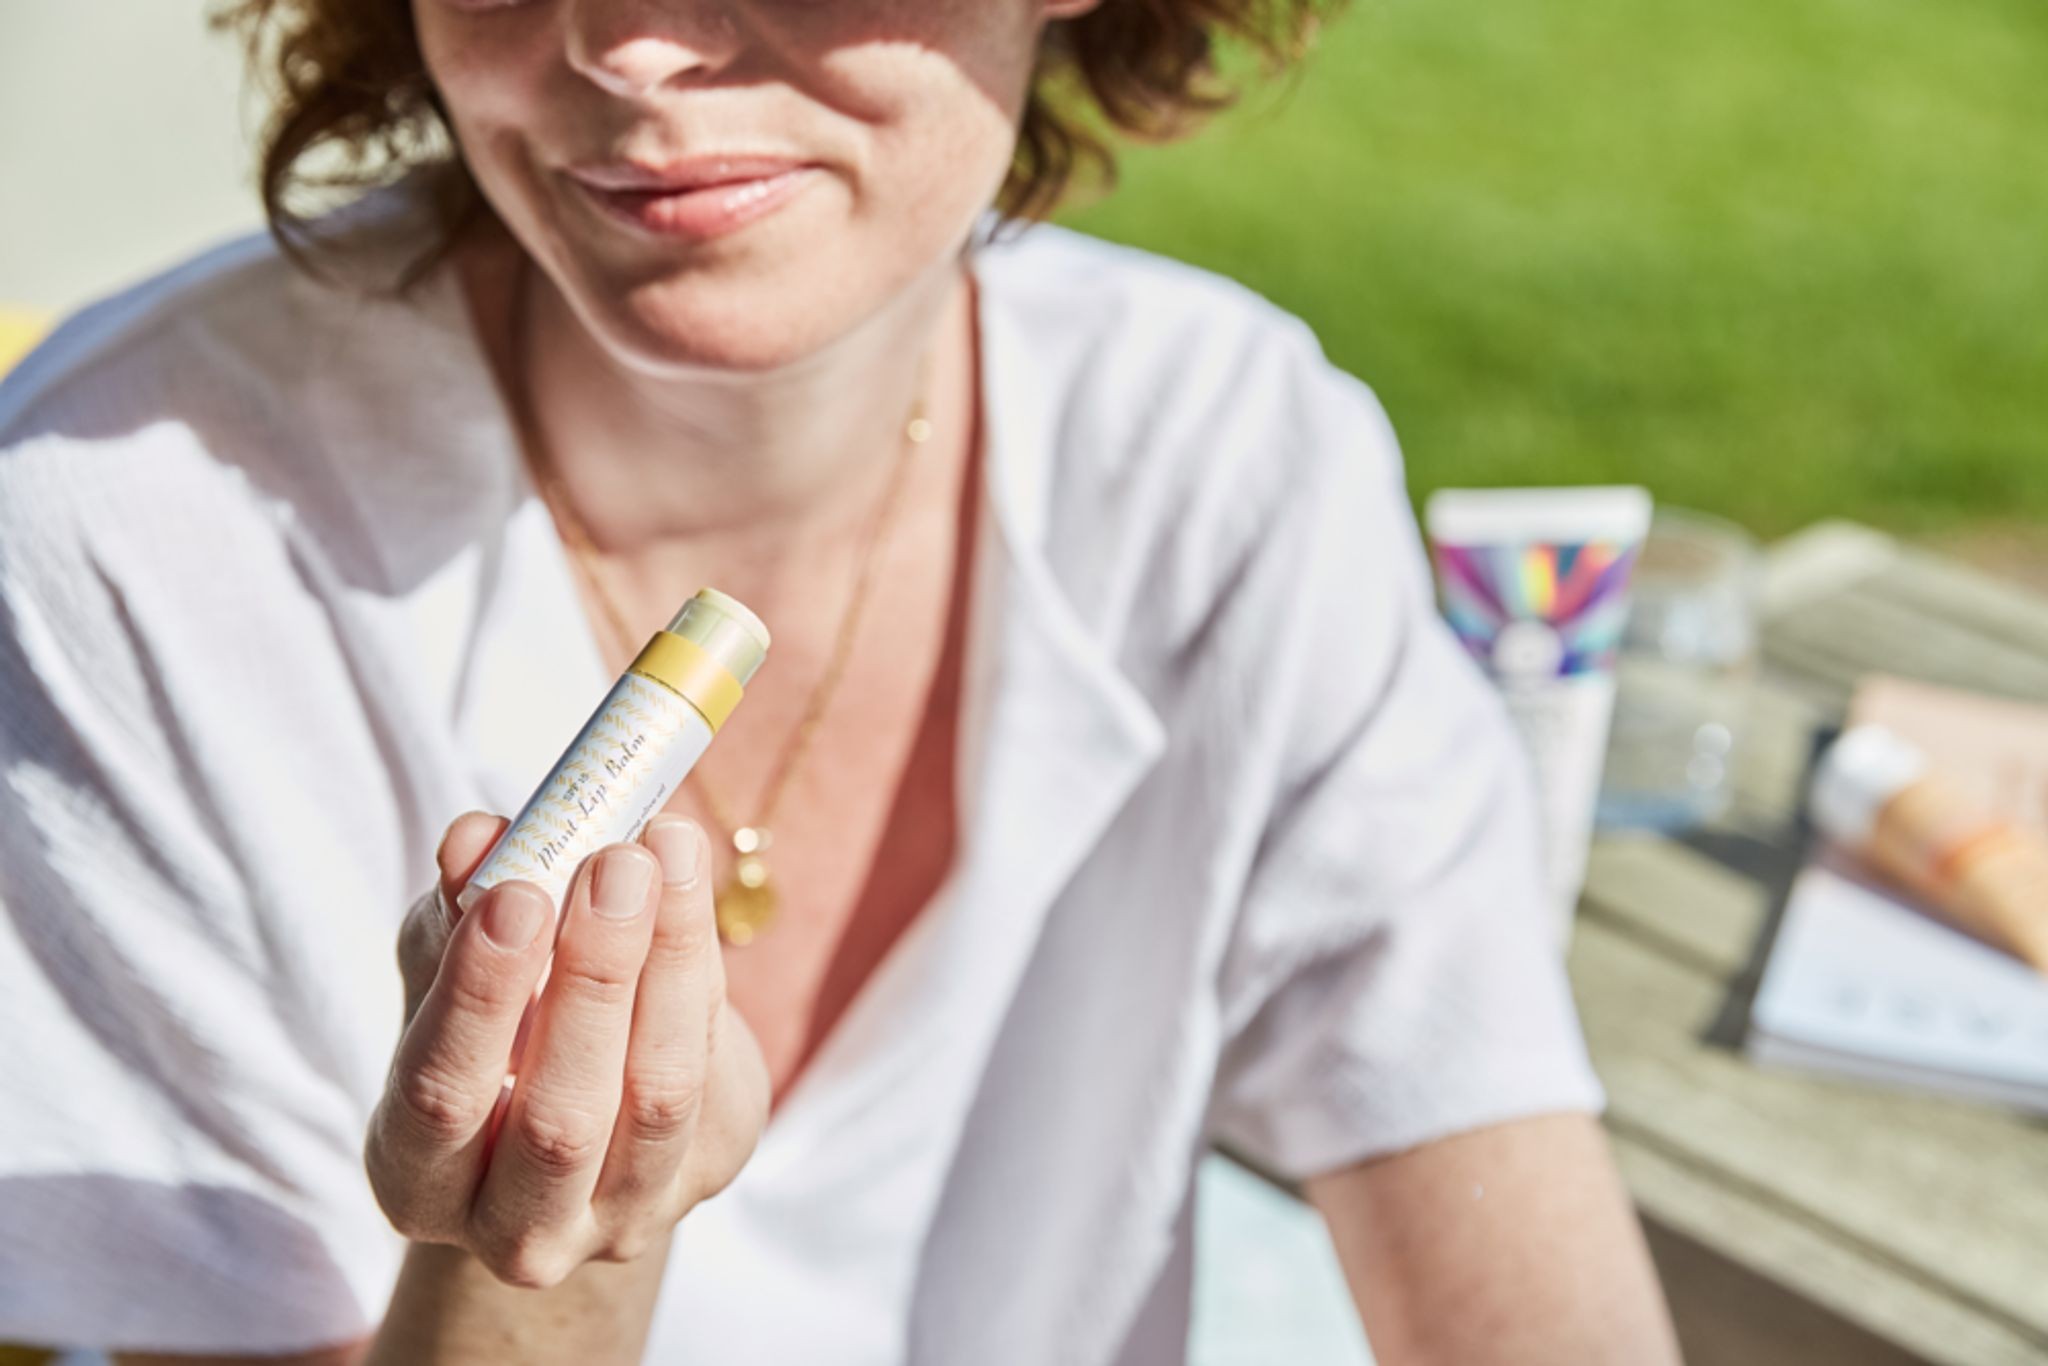 A person in a white shirt holding a tube of lip balm.